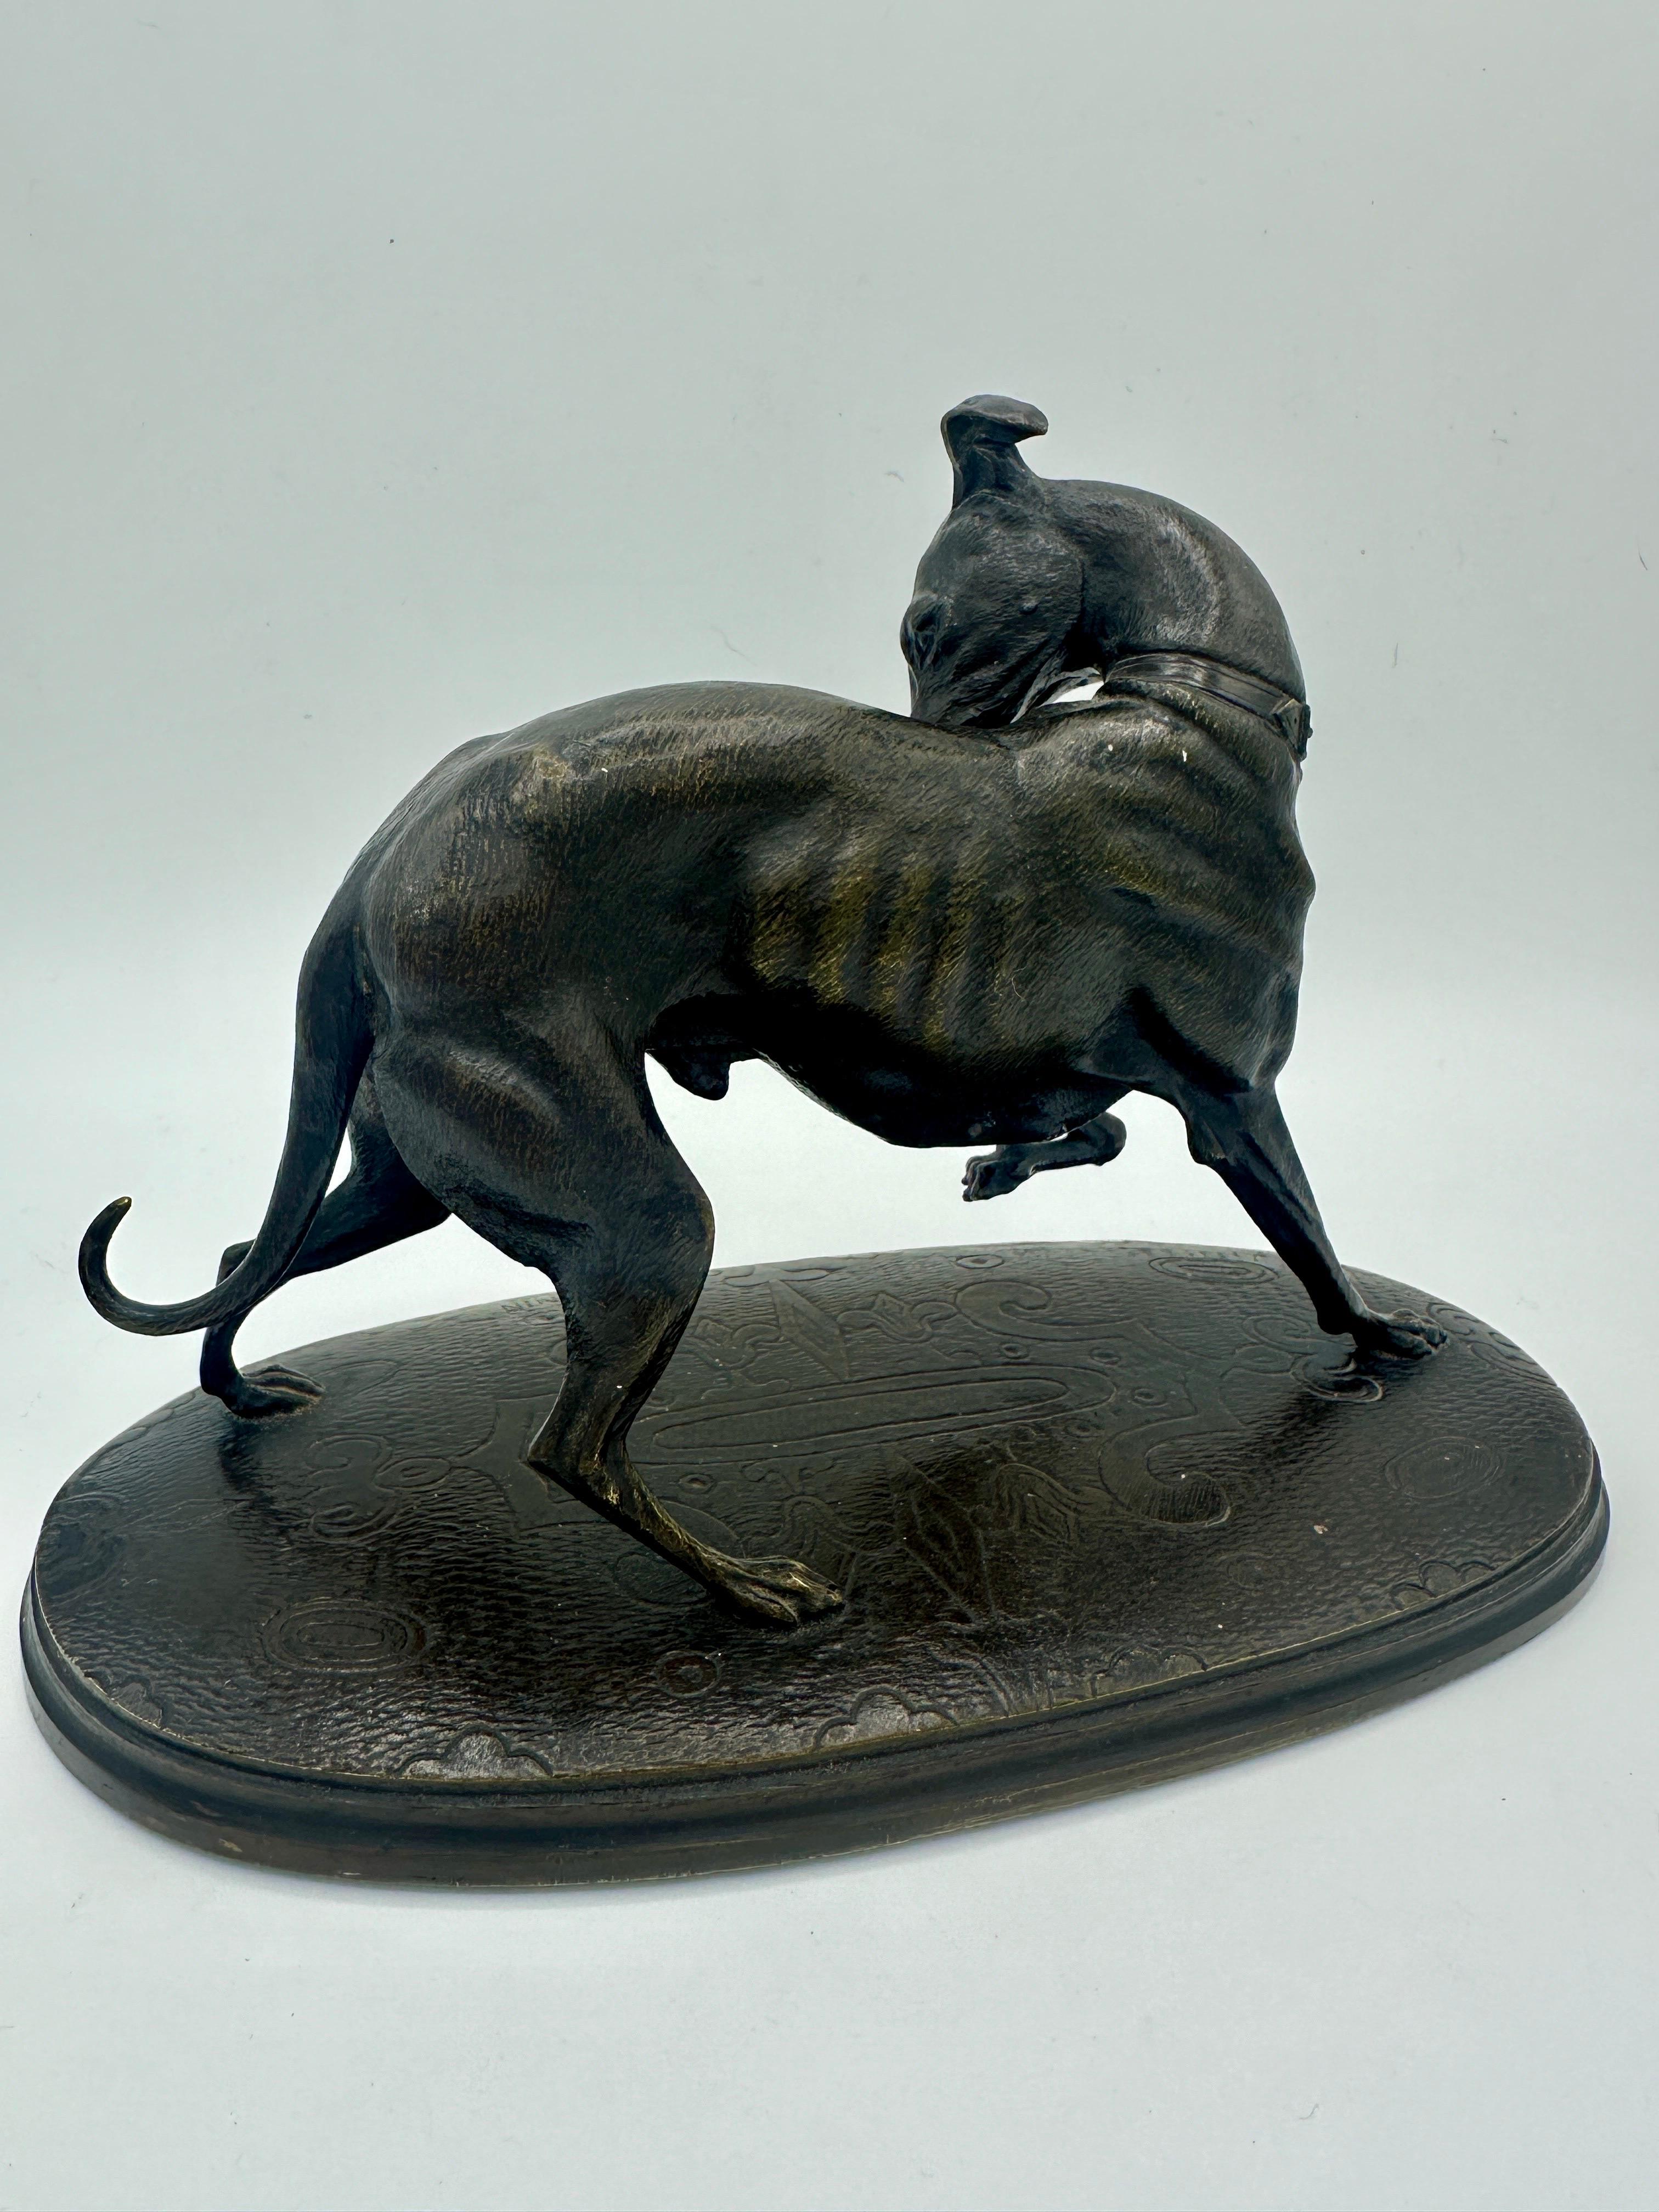 A late 19th century bronze figure of a greyhound, his front leg raised and head turned backwards as he grooms his coat. A finely detailed figure with a dark brown patina, mounted on a base incised with a decorative design of swirling lines and the